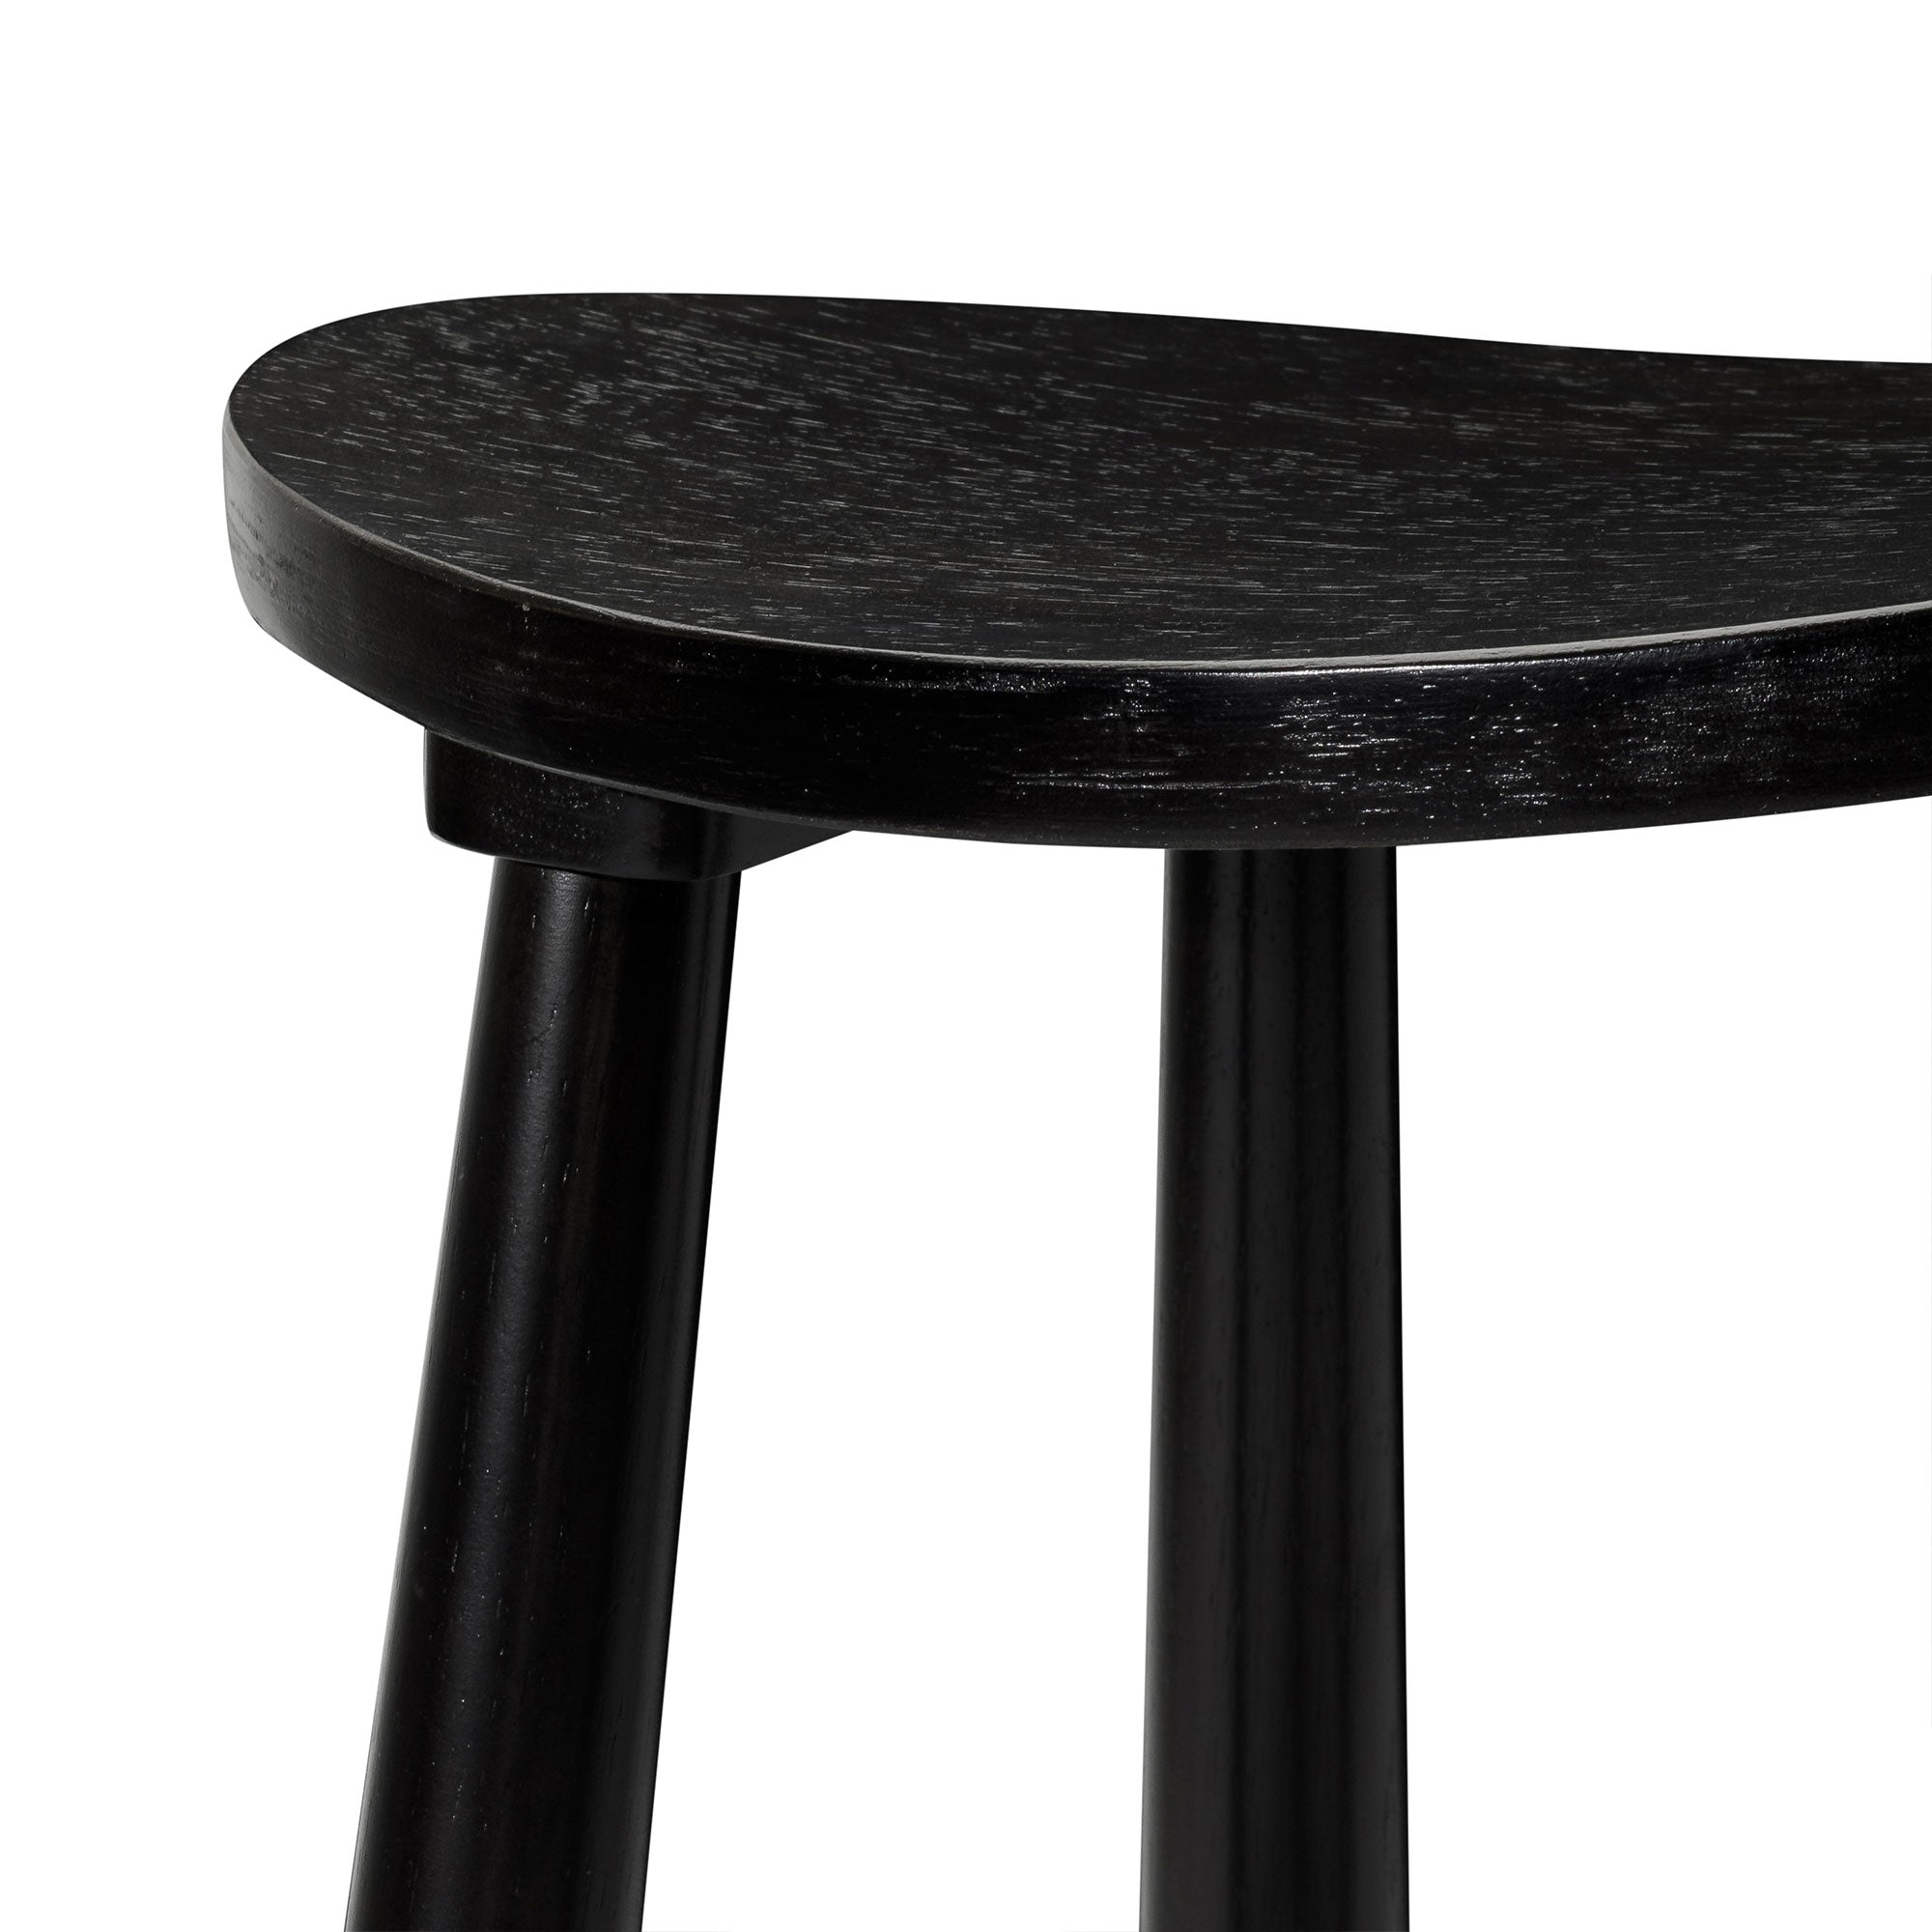 Luna Bar Stool in Rustic Black Wood Finish in Stools by Maven Lane